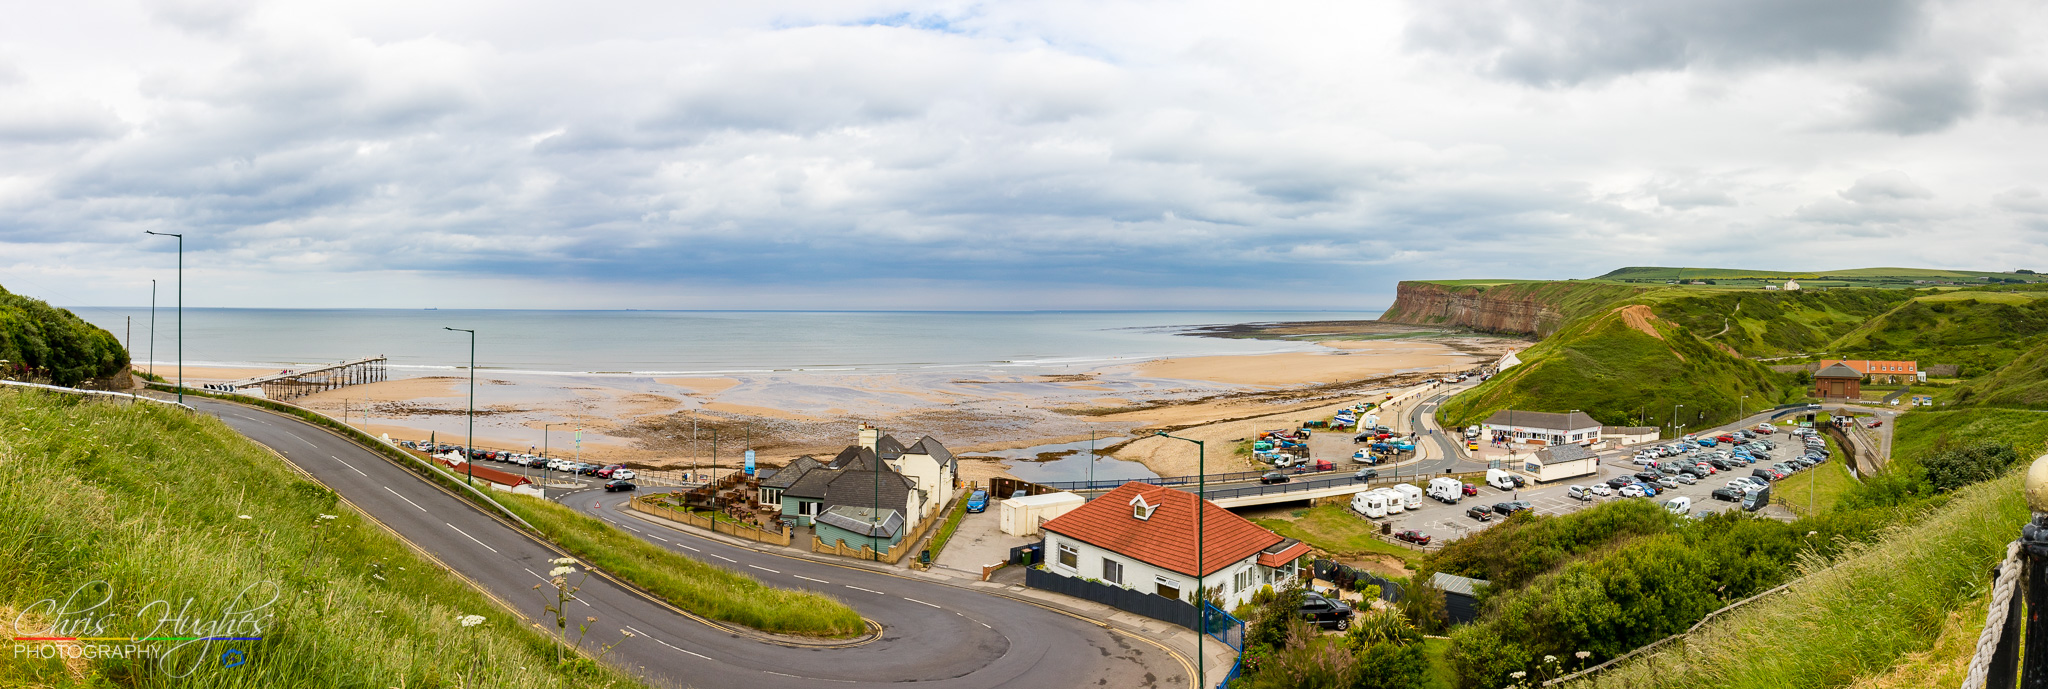 A view over Saltburn-by-the-Sea bay panaorama with tide out